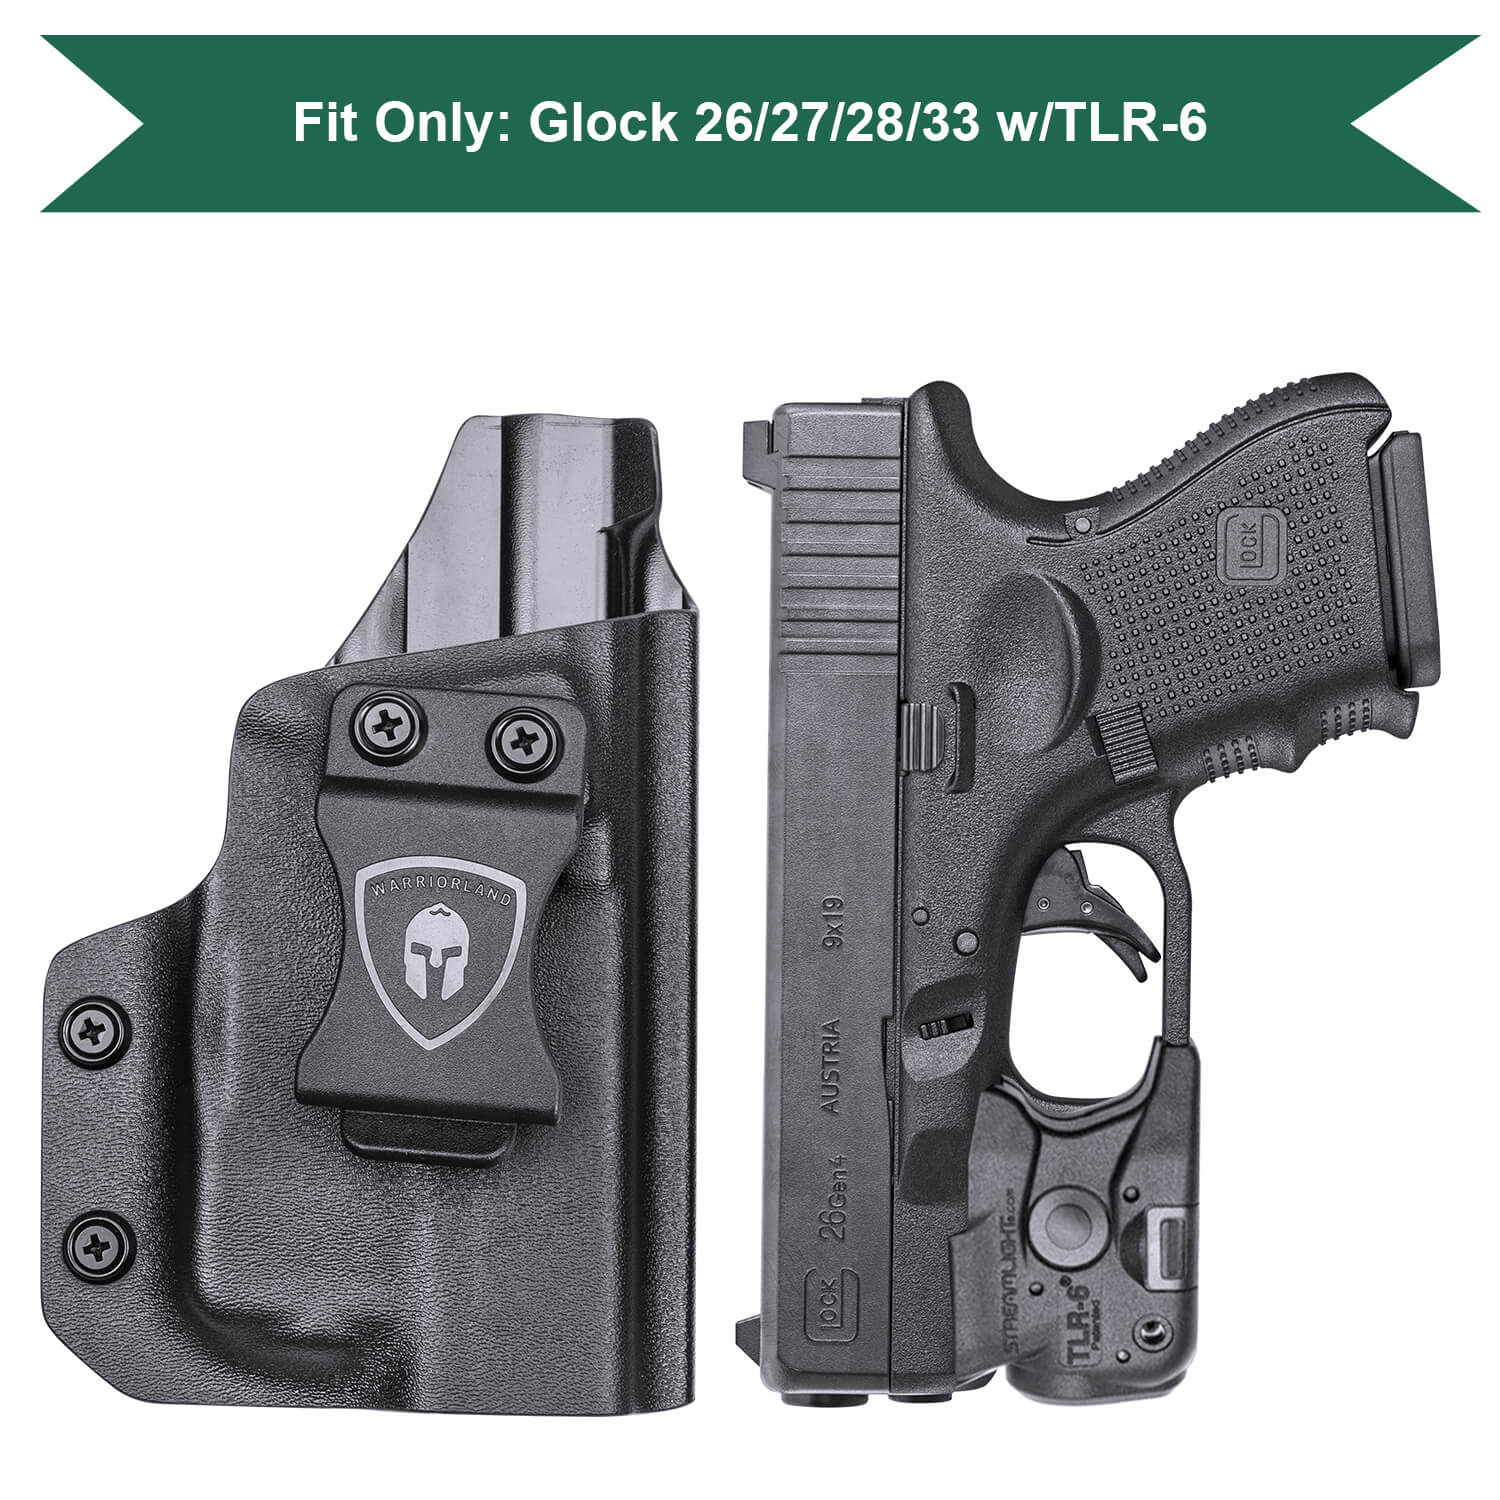 Glock 19 vs Glock 26 (with pictures) - Clinger Holsters